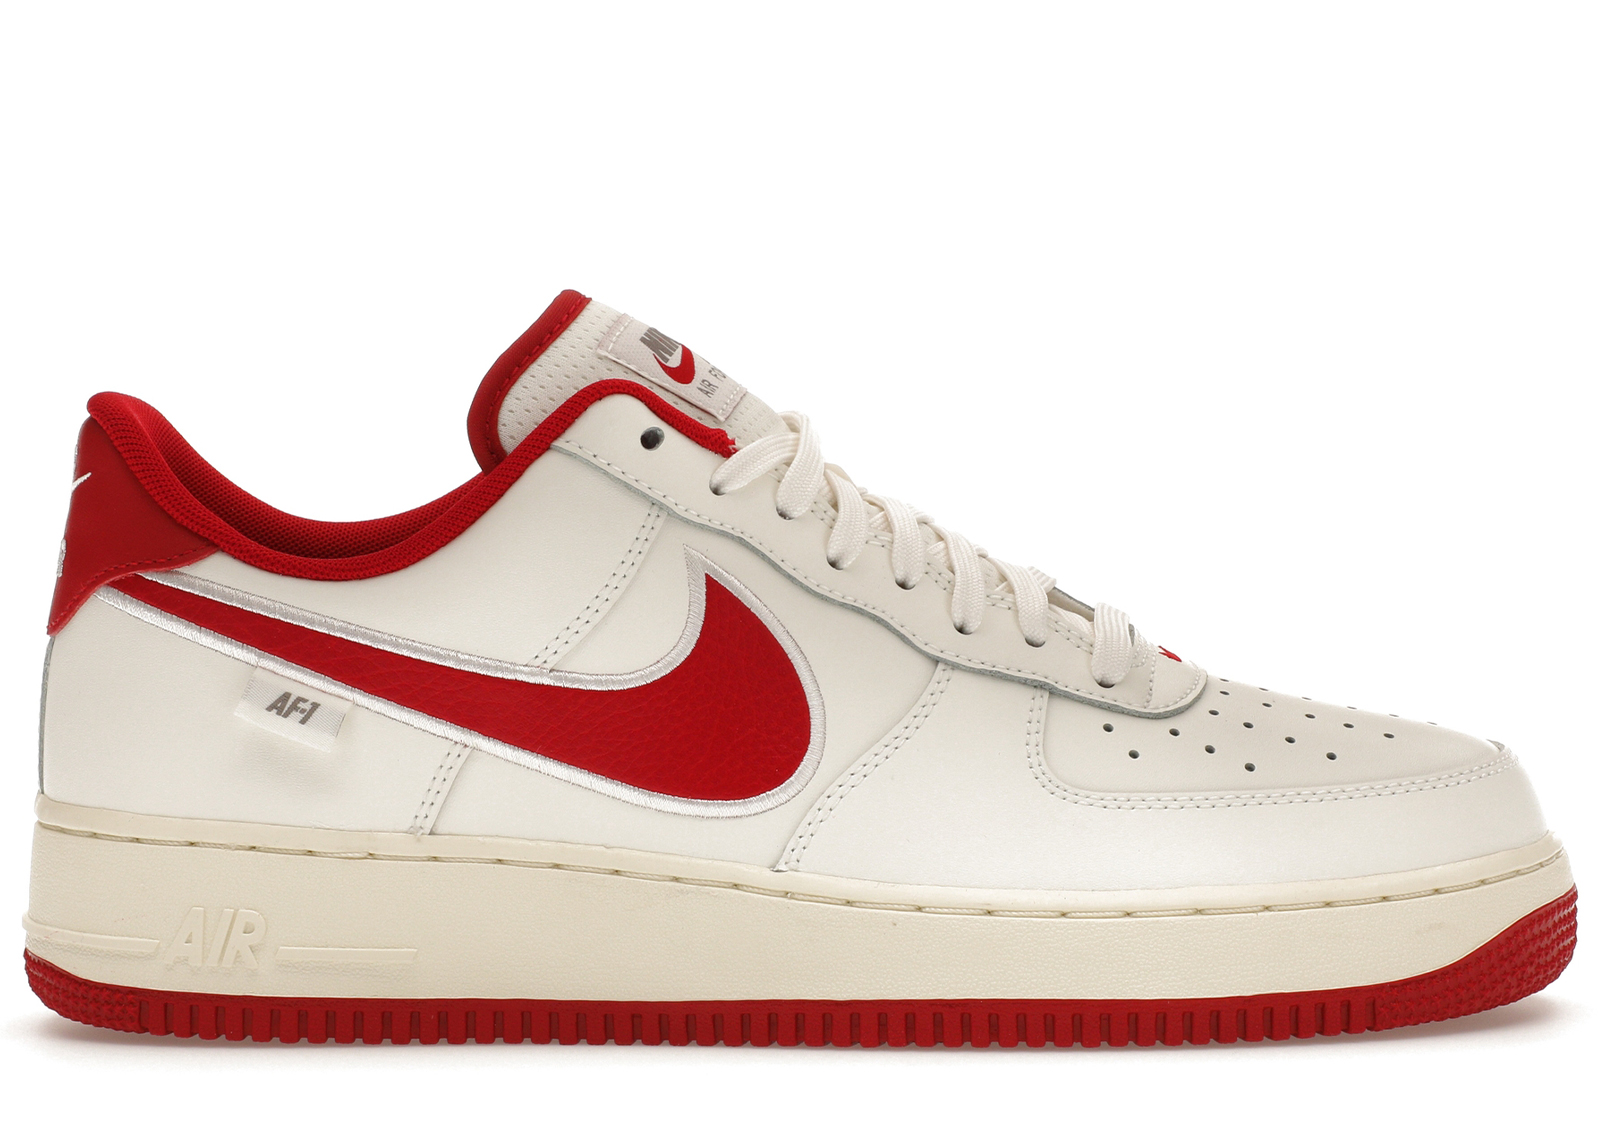 Nike Air Force 1 Low '07 Sail Gym Red